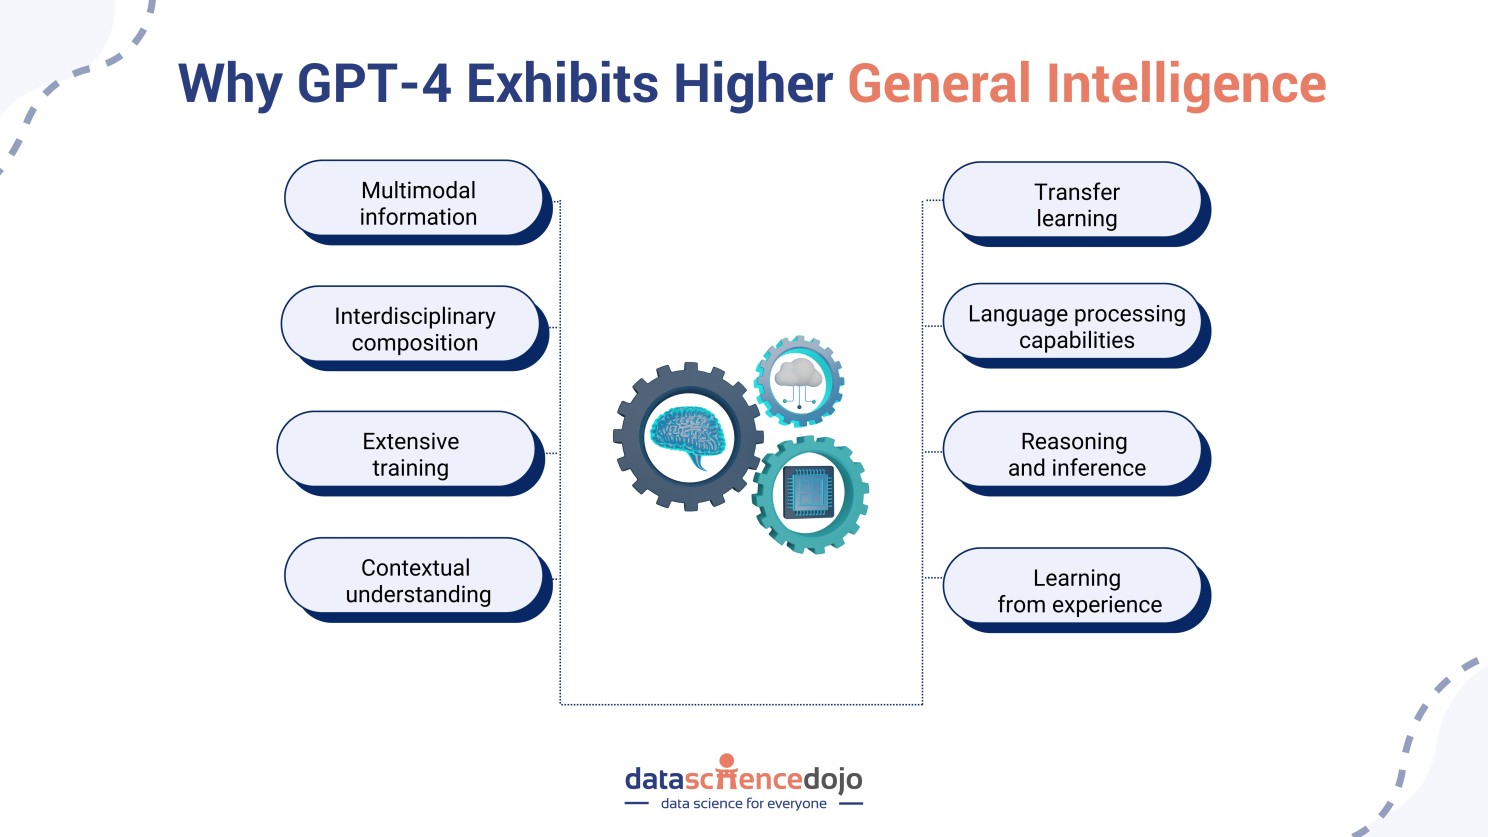 Why GPT-4 exhibits higher general intelligence